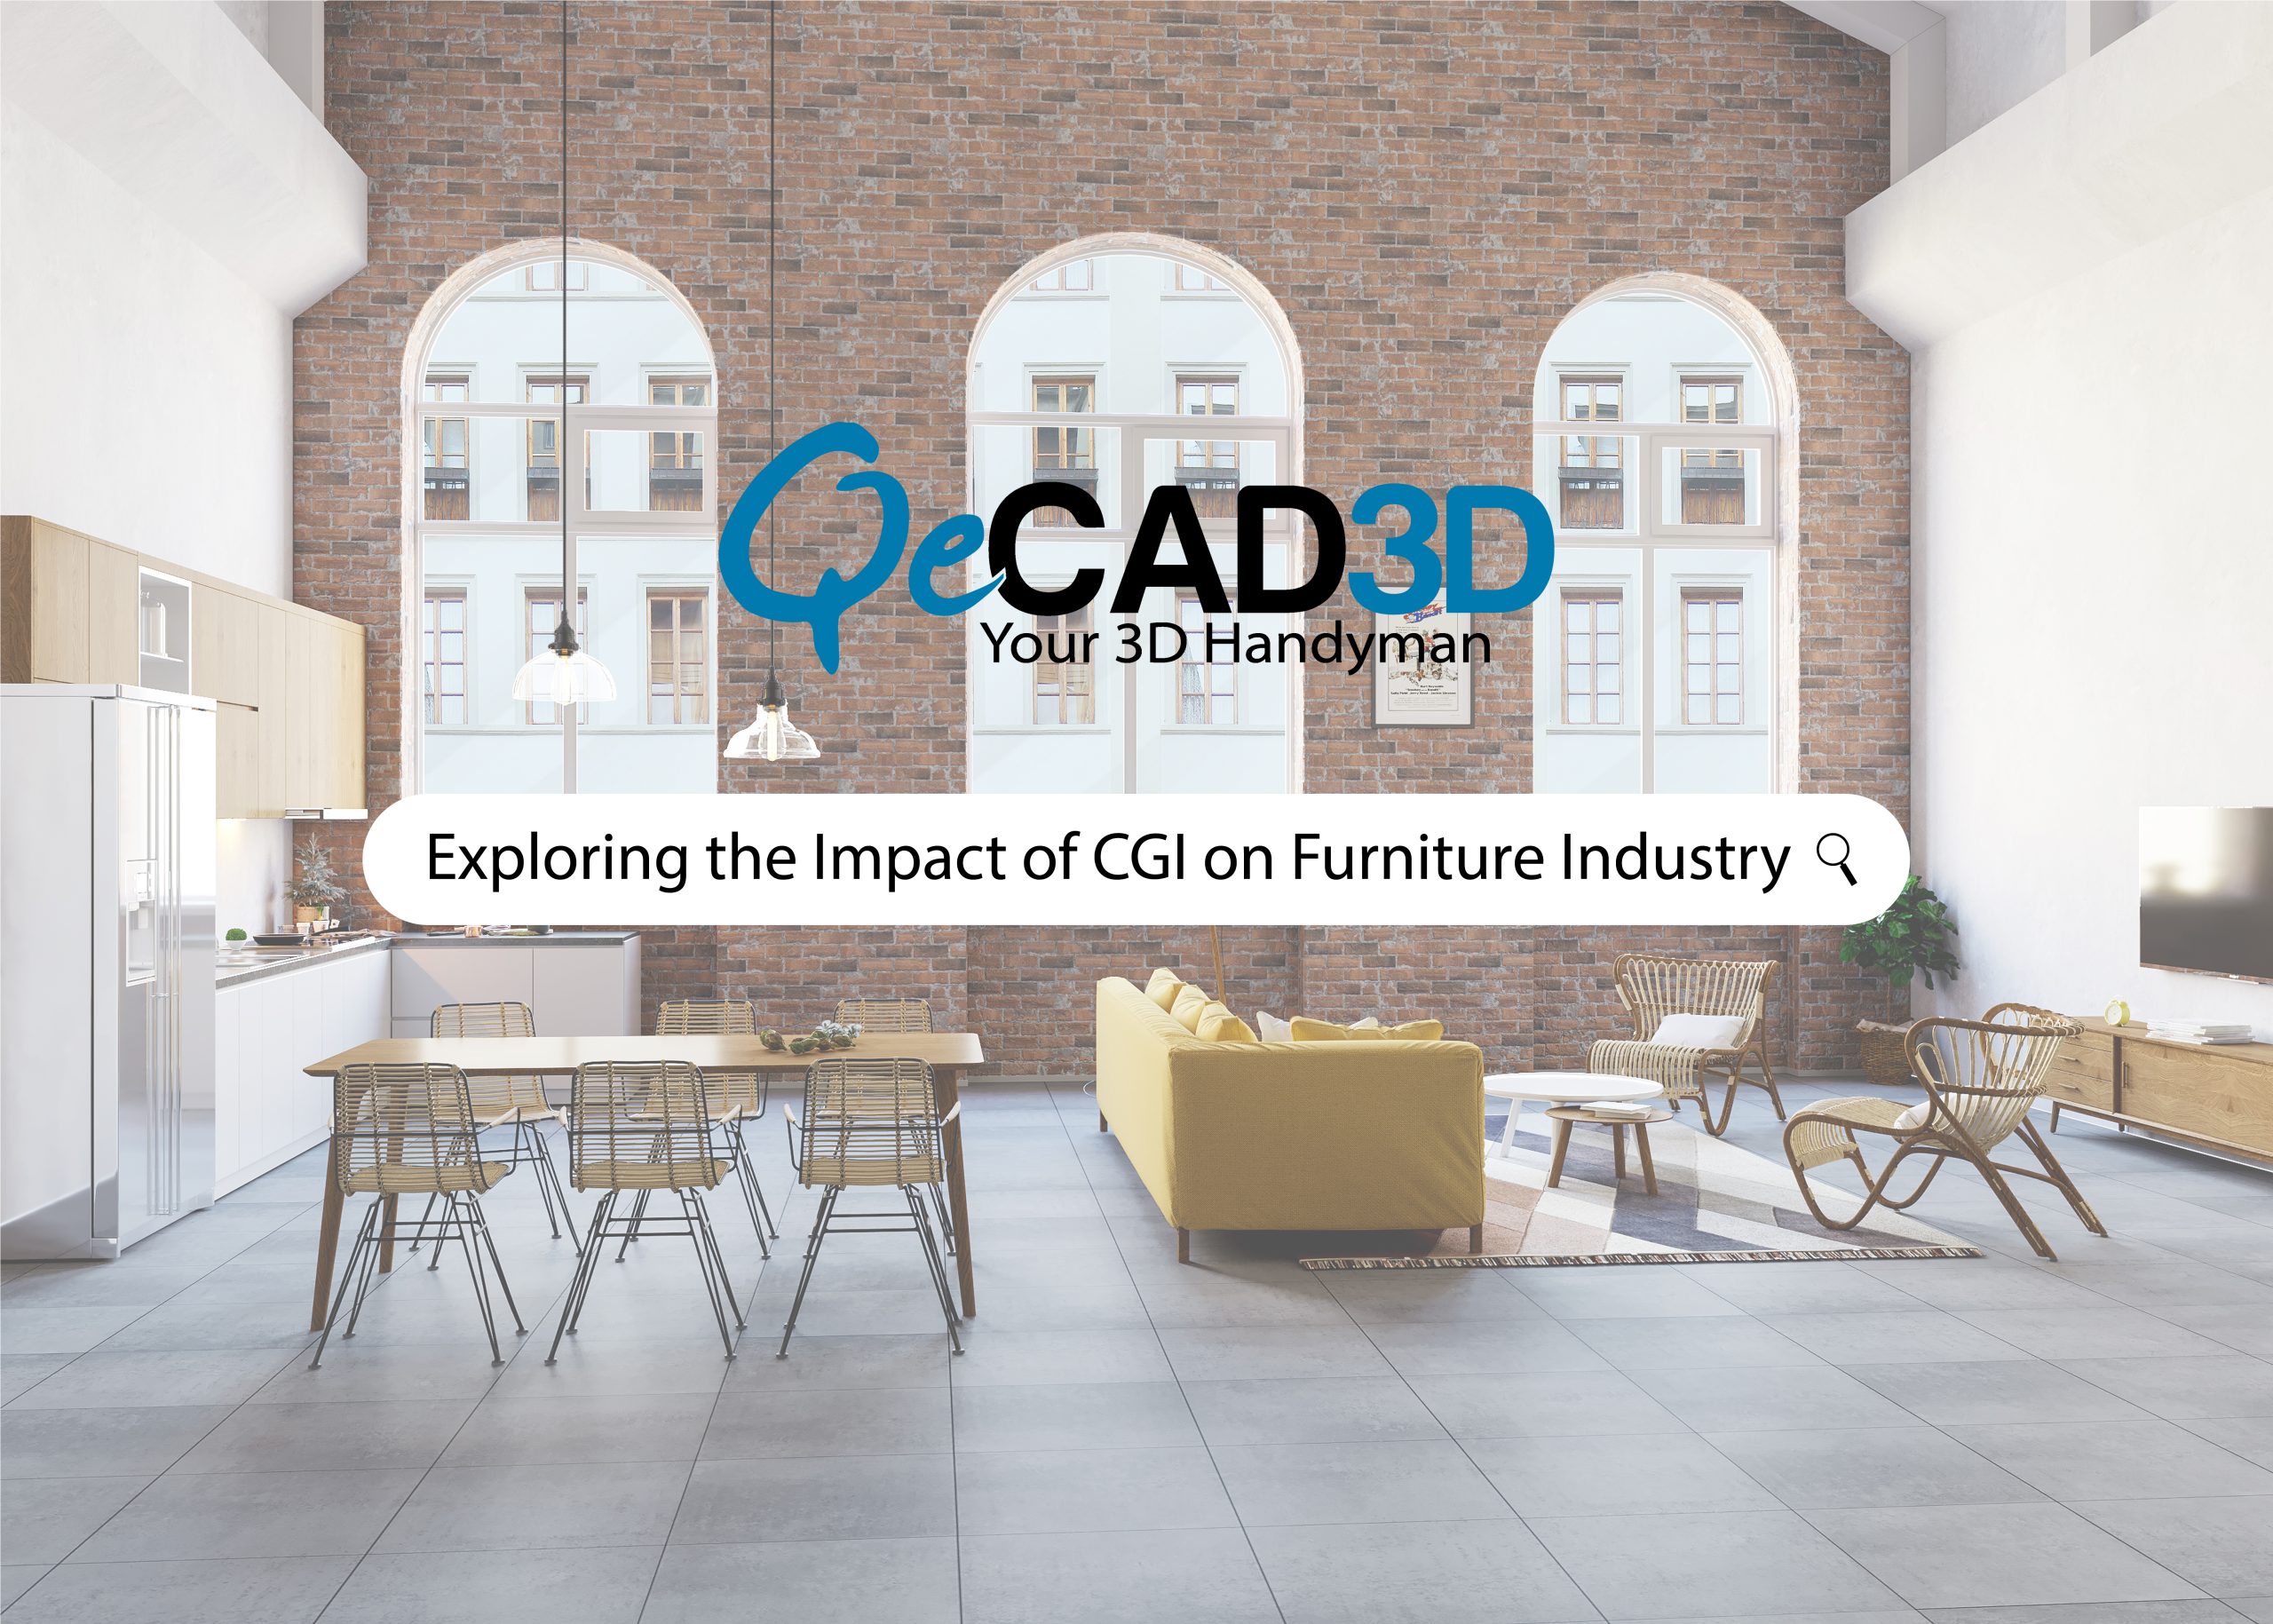 Exploring the Impact of CGI on Furniture Industry